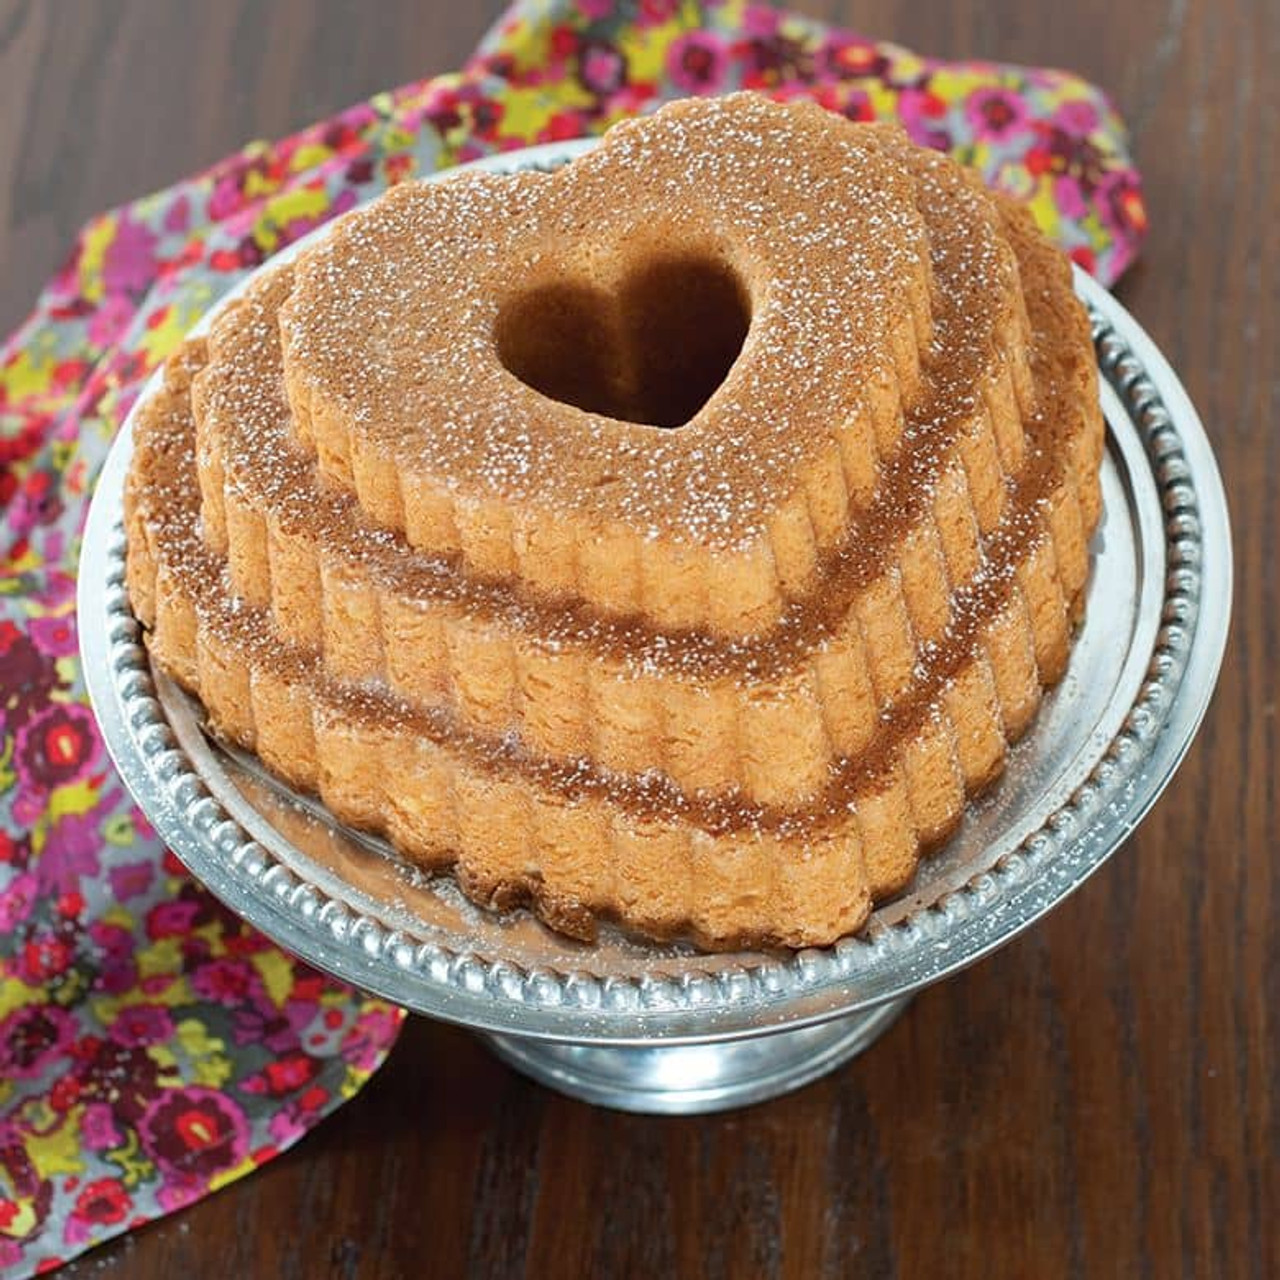 https://cdn11.bigcommerce.com/s-hccytny0od/images/stencil/1280x1280/products/741/3931/nordic-ware-tiered-heart-bundt-pan-2__61178.1583507143.jpg?c=2?imbypass=on